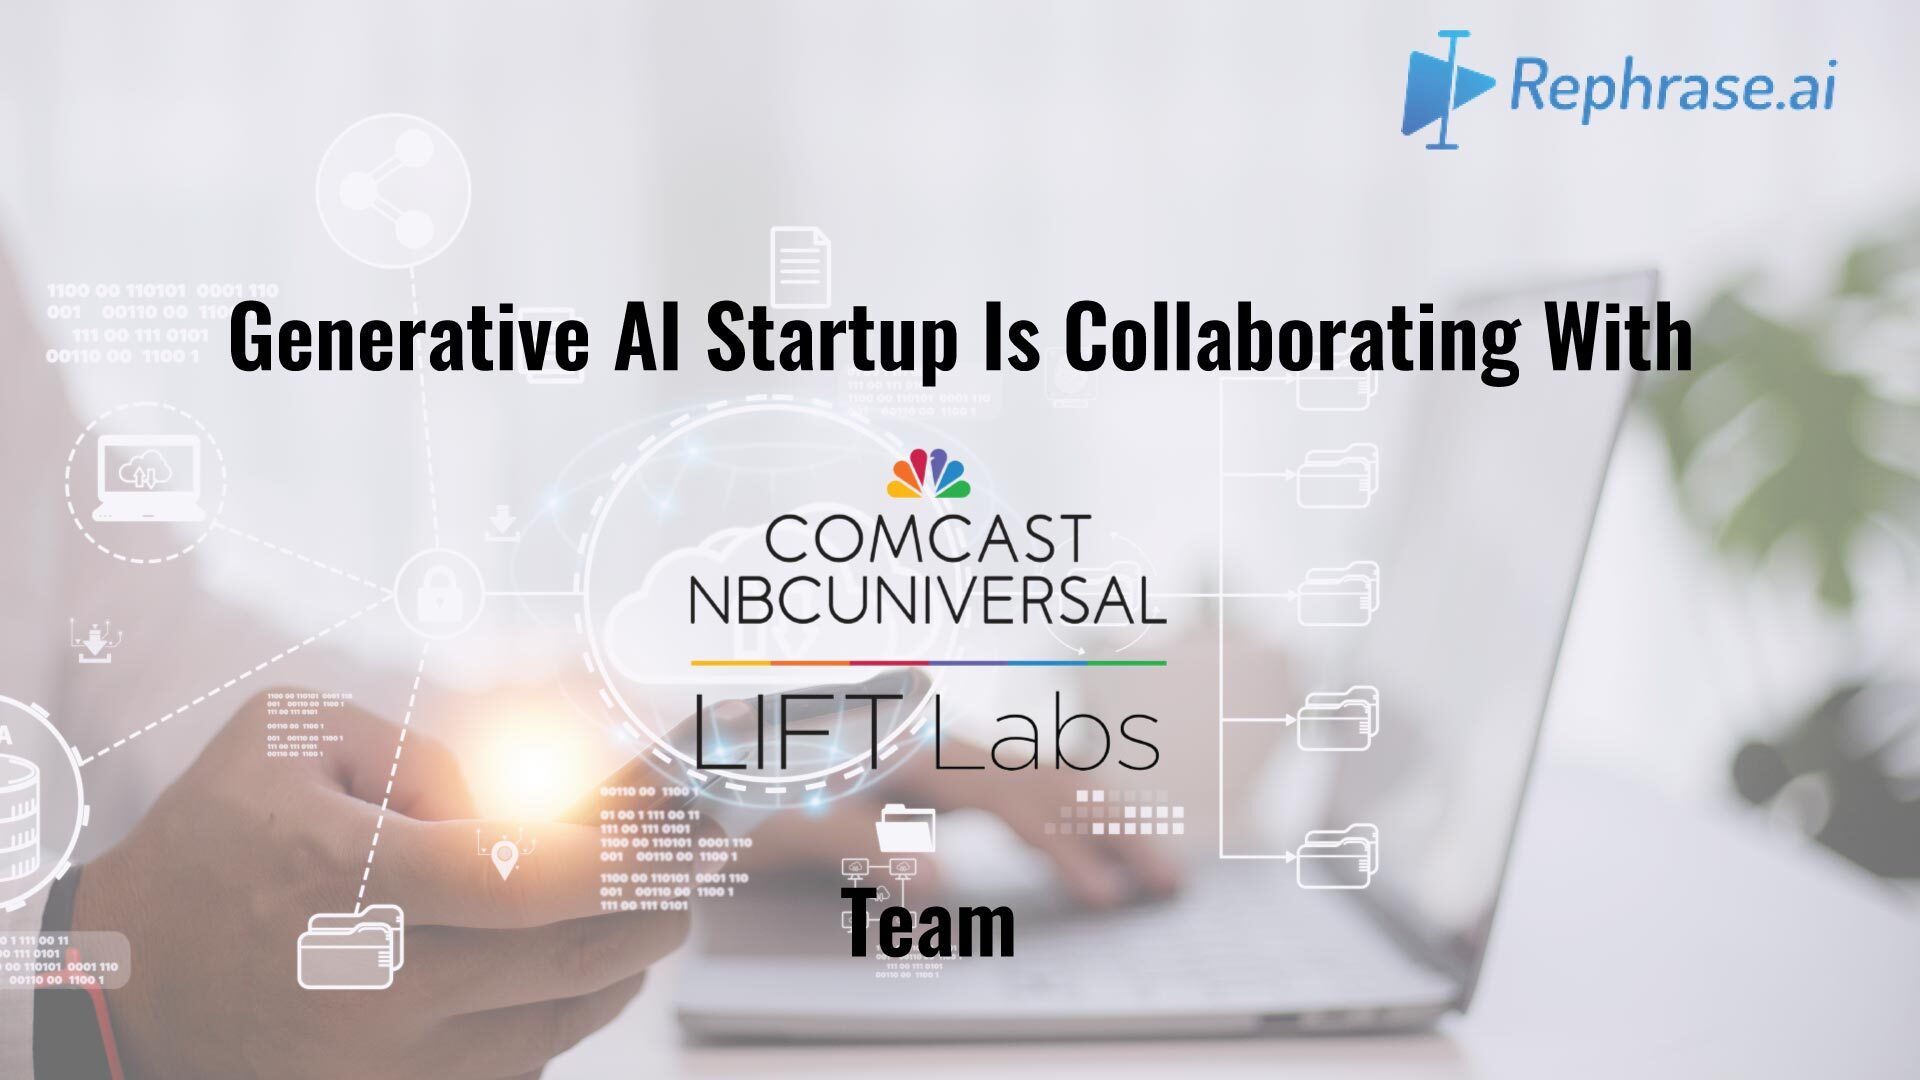 Rephrase.ai Graduates from Comcast NBCUniversal LIFT Labs Generative AI Accelerator with Proof of Concept